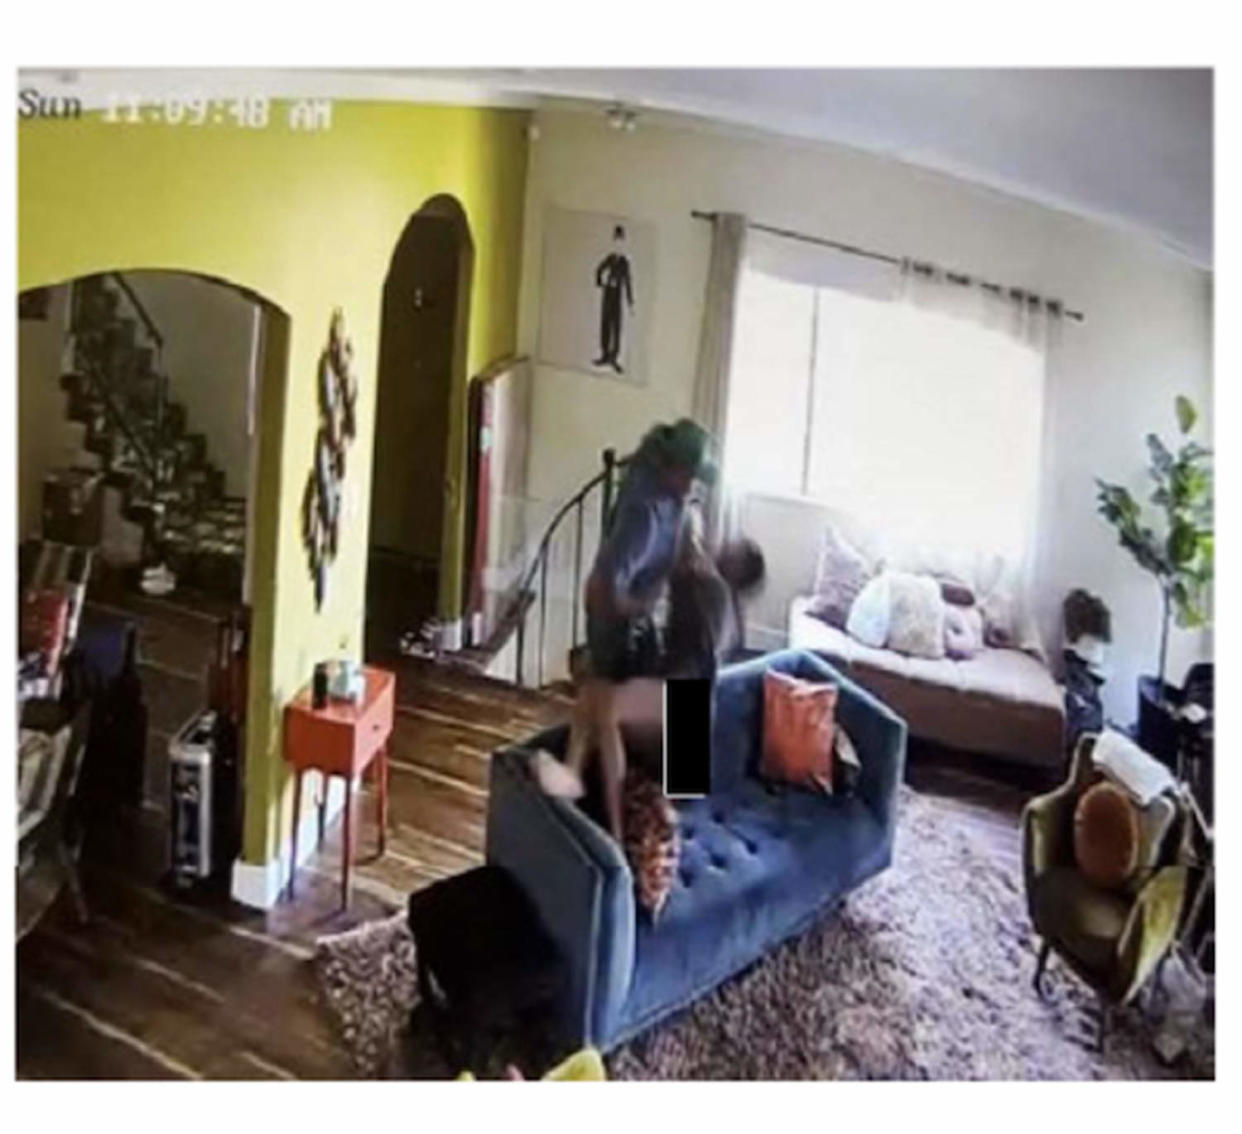 A screenshot of home security footage showing Darius Jackson allegedly grabbing at Keke Palmer's neck and face and stealing her phone out of her hands at her home on Nov. 5, 2023. (Superior Court of California County of Los Angeles)